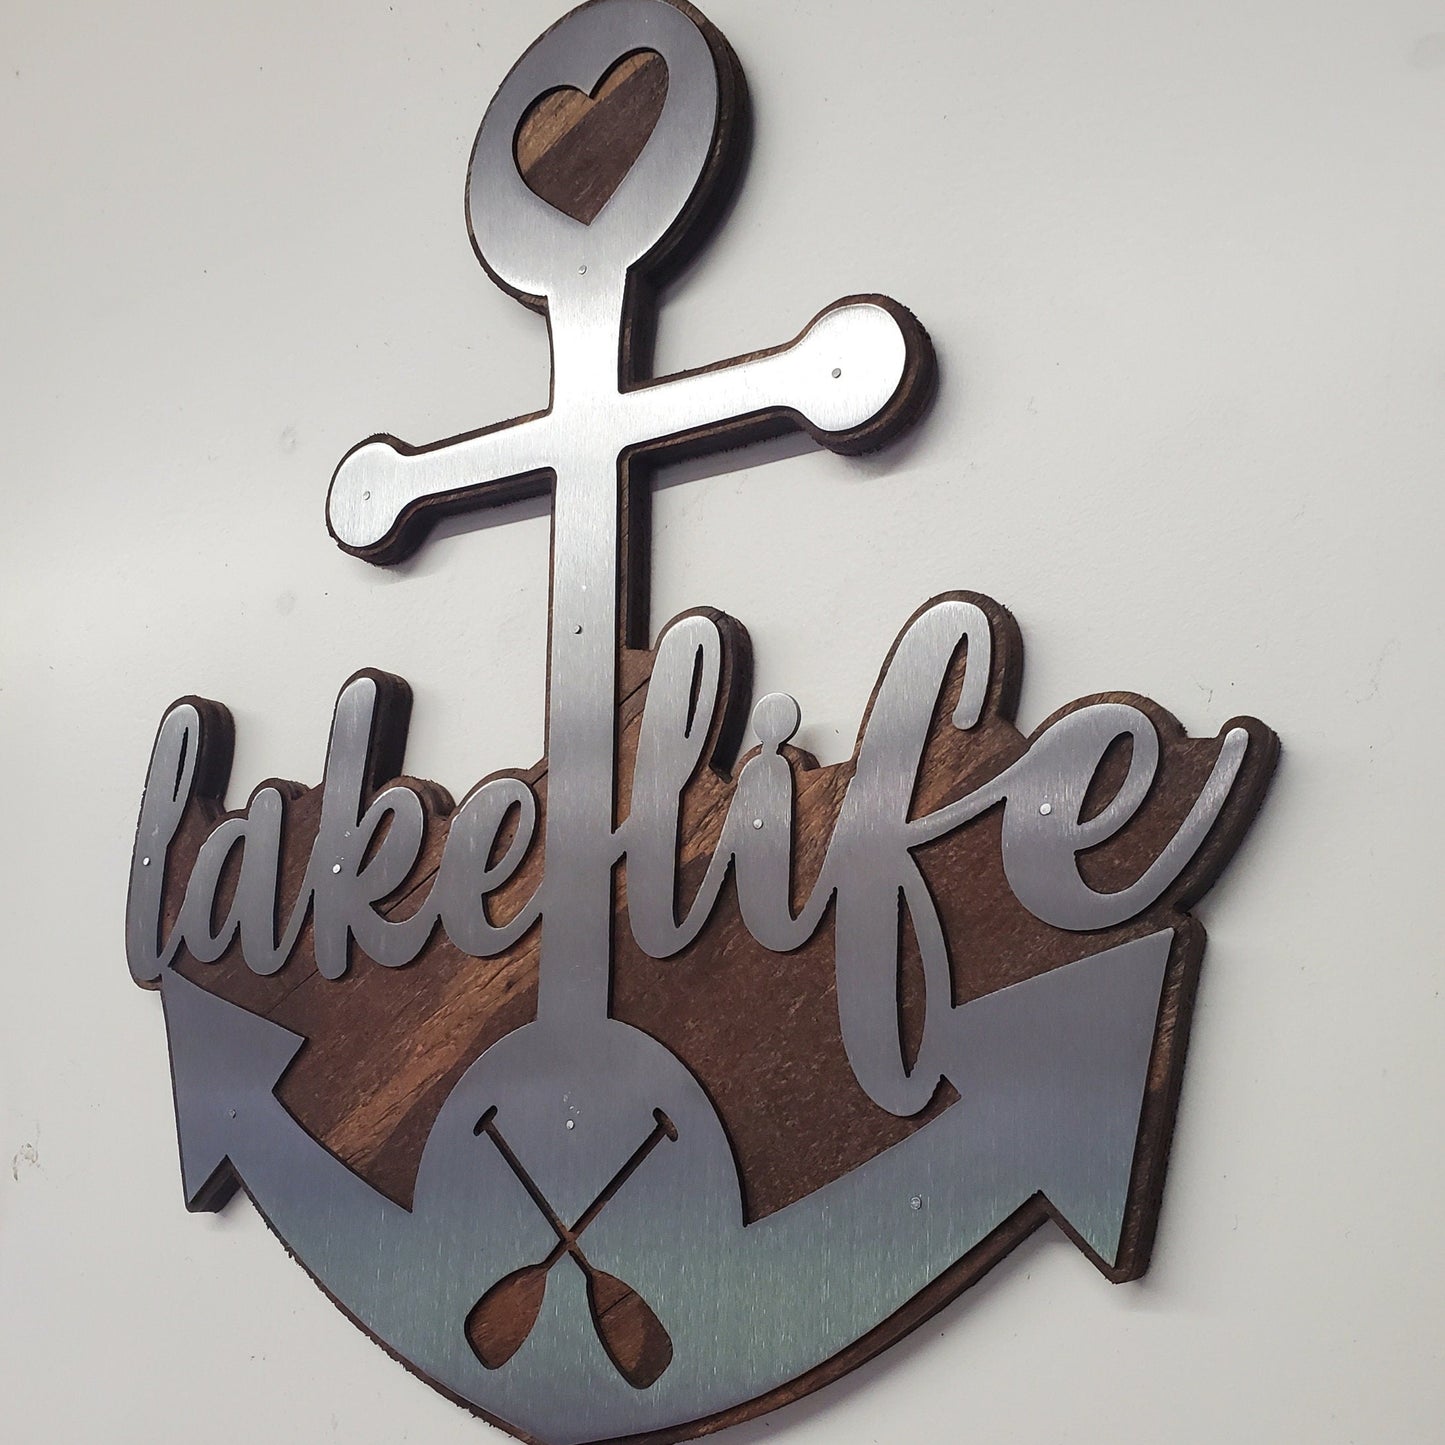  beautiful metal art wall decor of an Anchor, perfect for all the "lake life" enthusiasts out there. The Anchor made in our family shop in Minnesota. The words "lake life" are cut into the Anchor adding a unique touch to the piece.